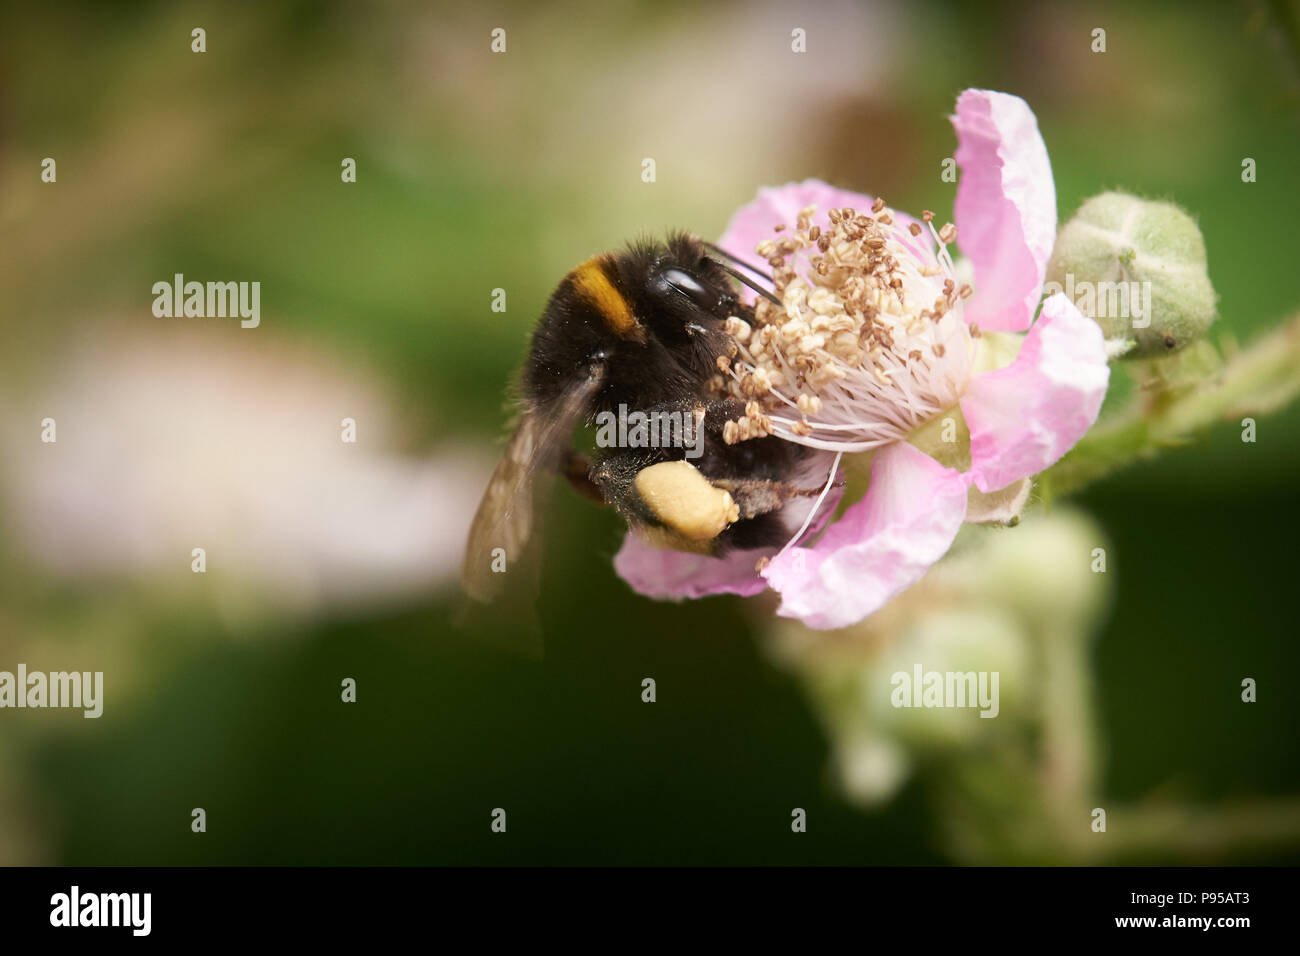 Blackberry blossom with bumblebee Stock Photo